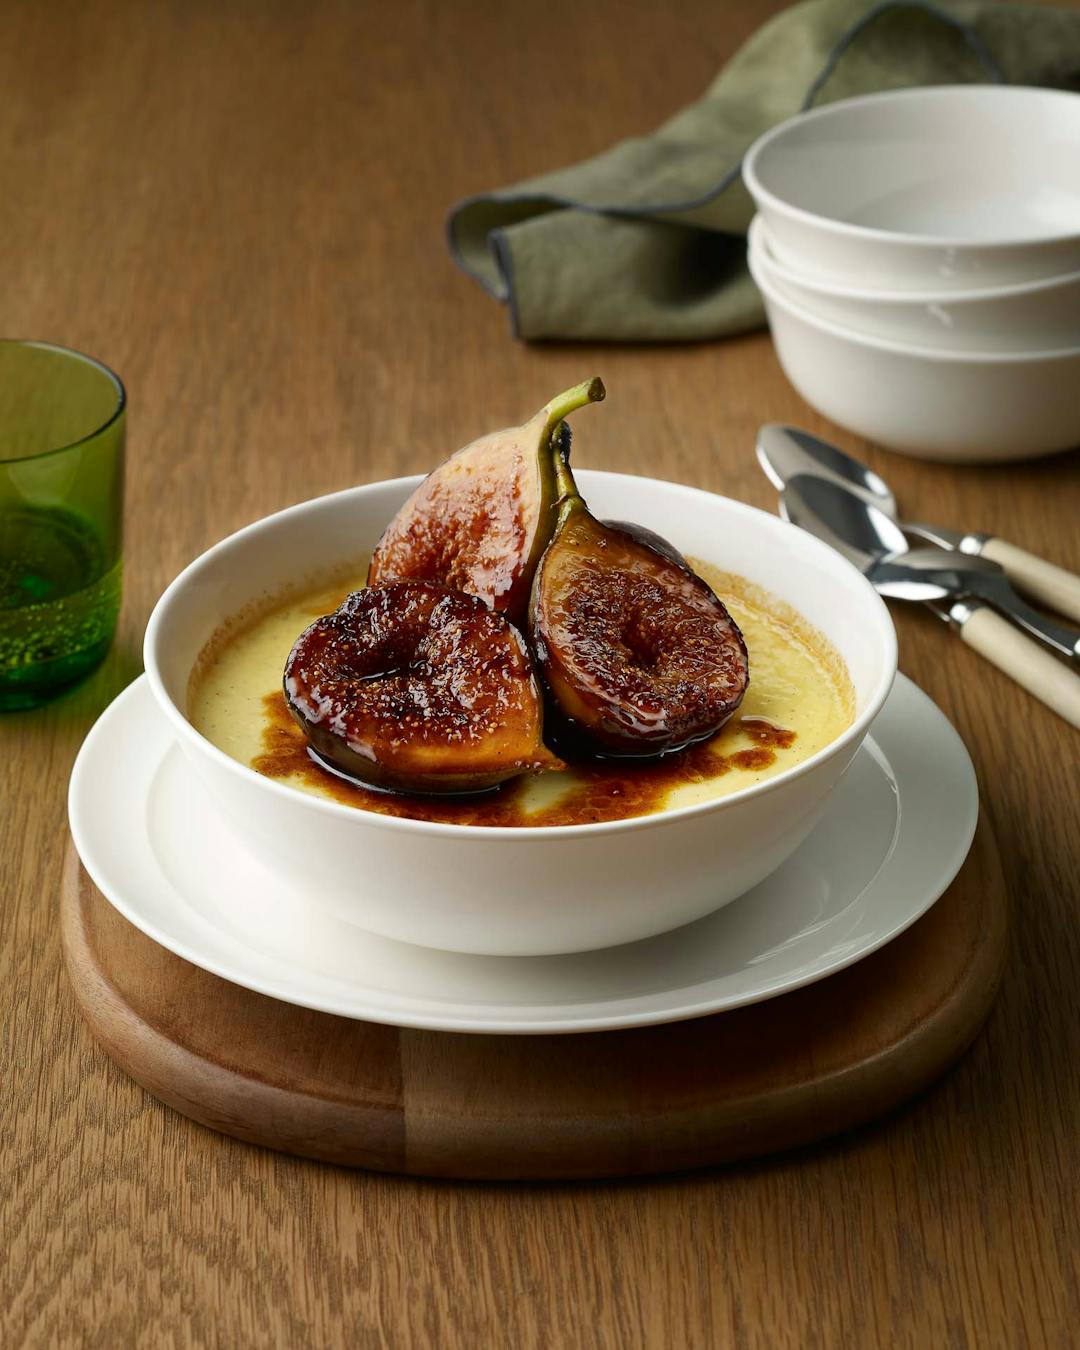 Baked sour cream custard with caramelised figs